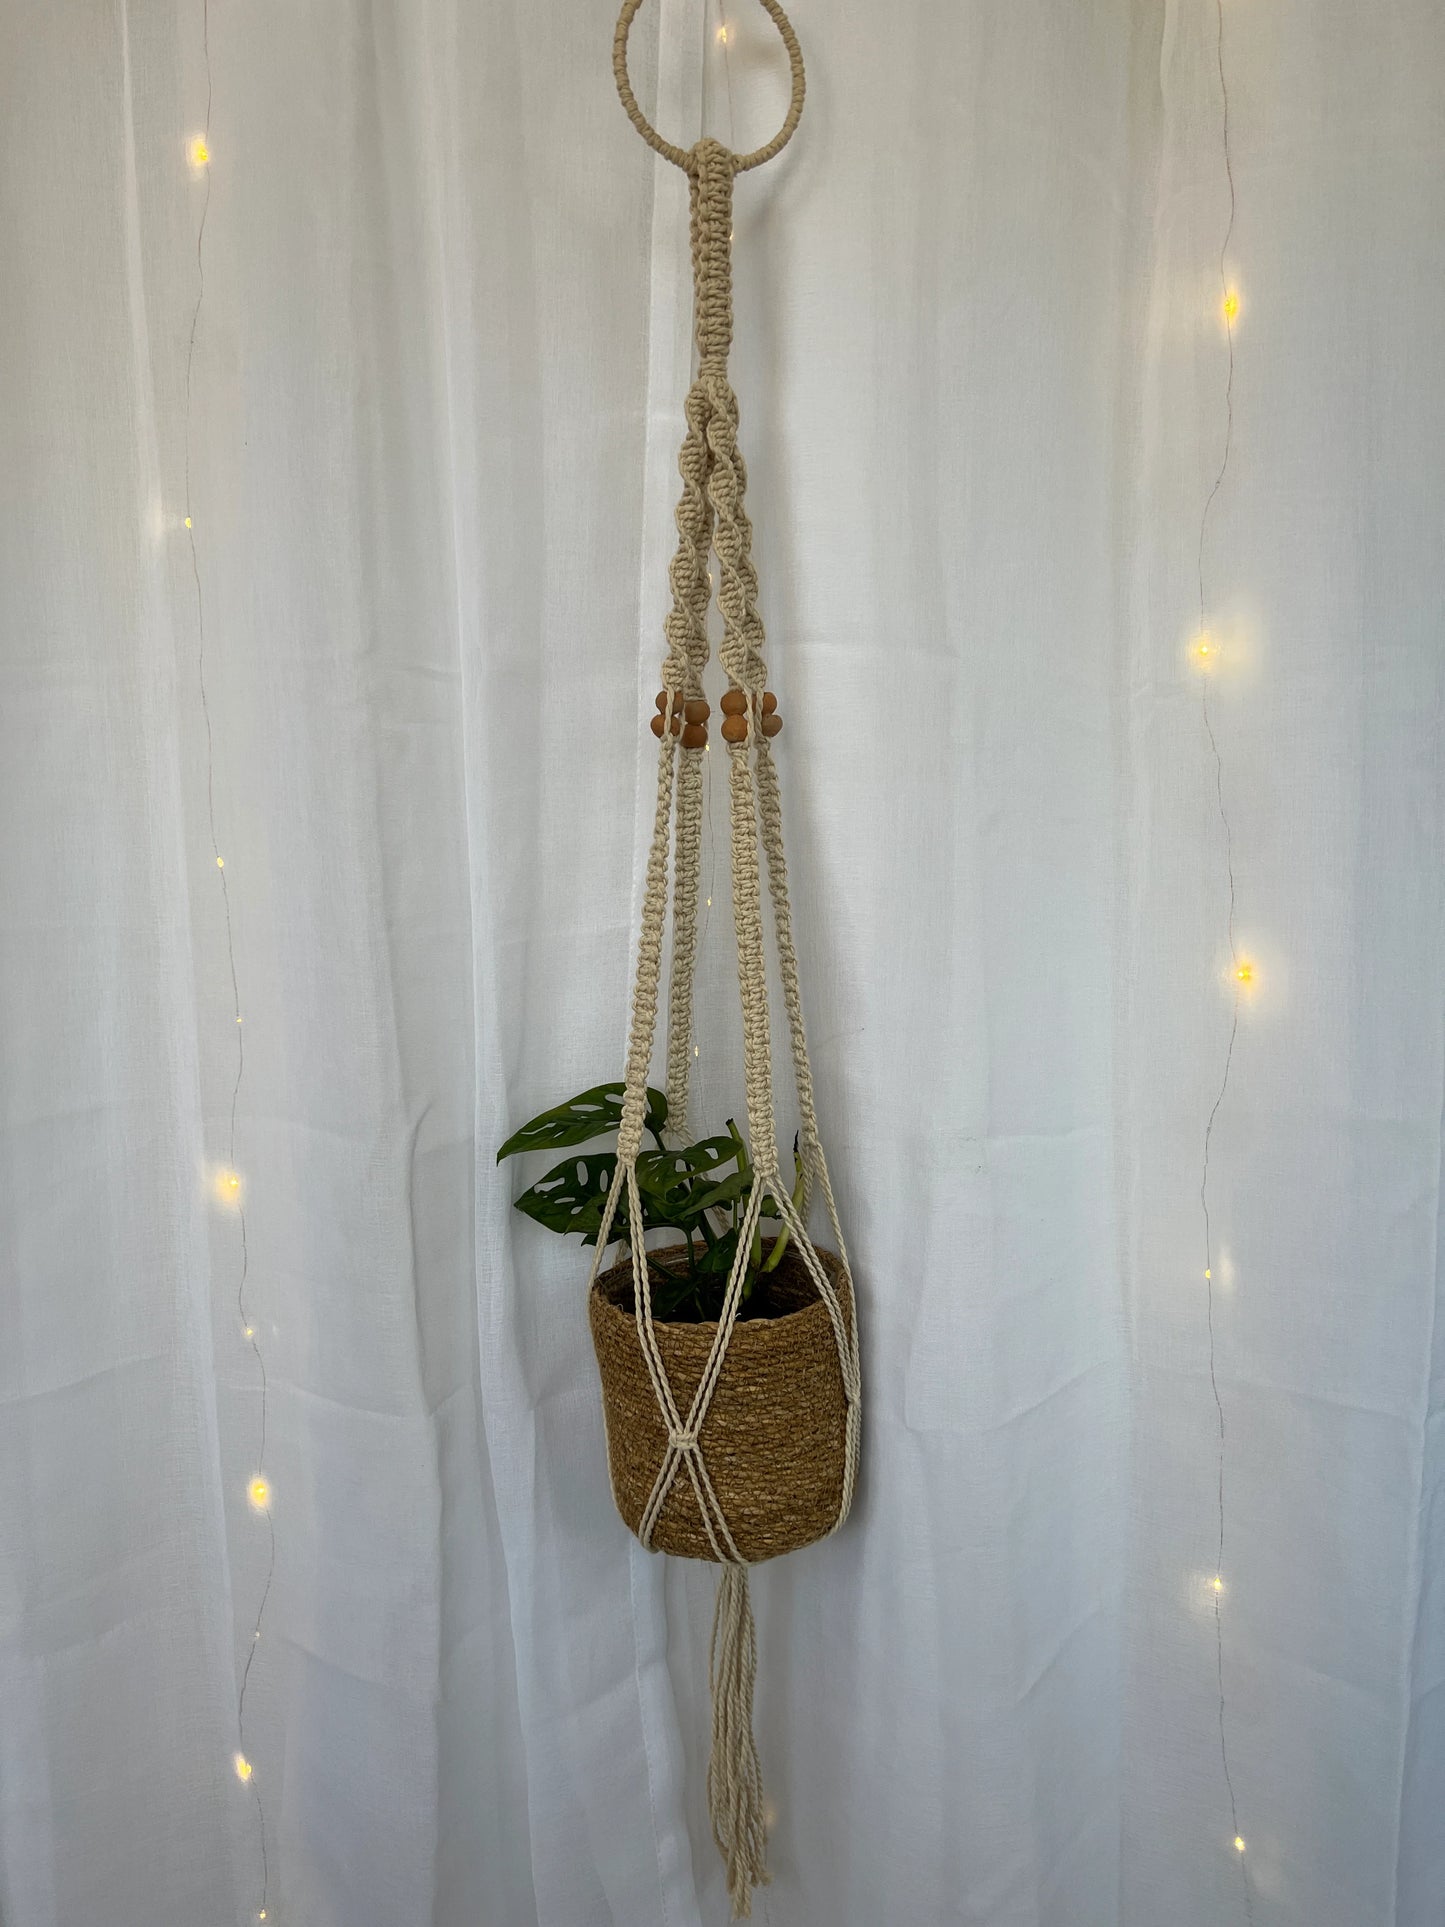 Monstera Monkey Mask Adansonii Plant (Swiss Cheese Plant) with Pot and Macrame Plant Hanger